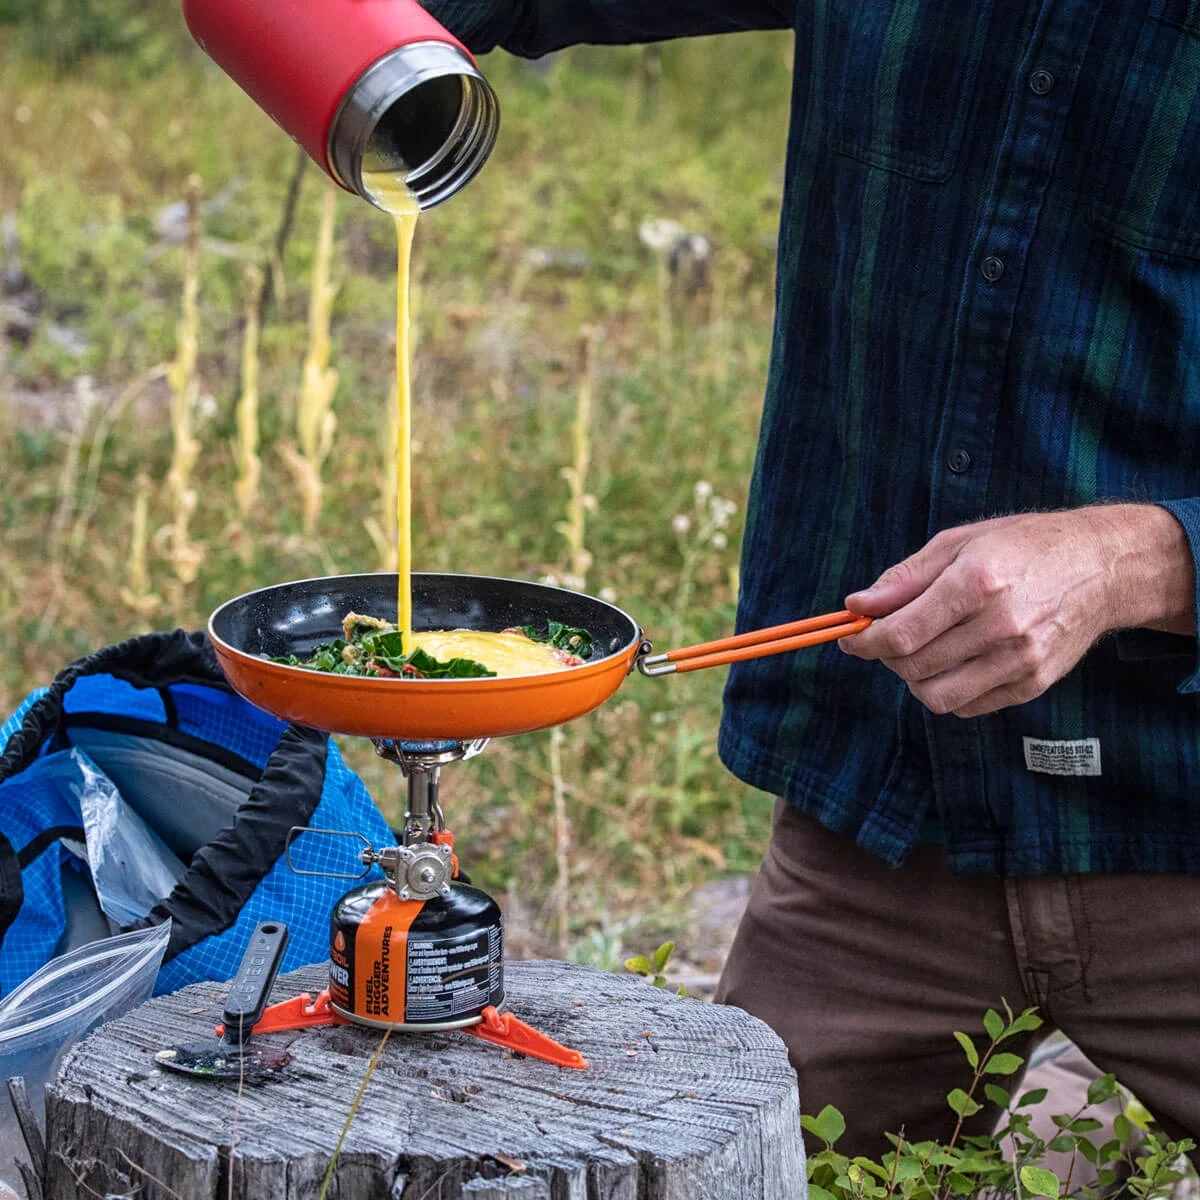 Cooking eggs with the Summit Skillet